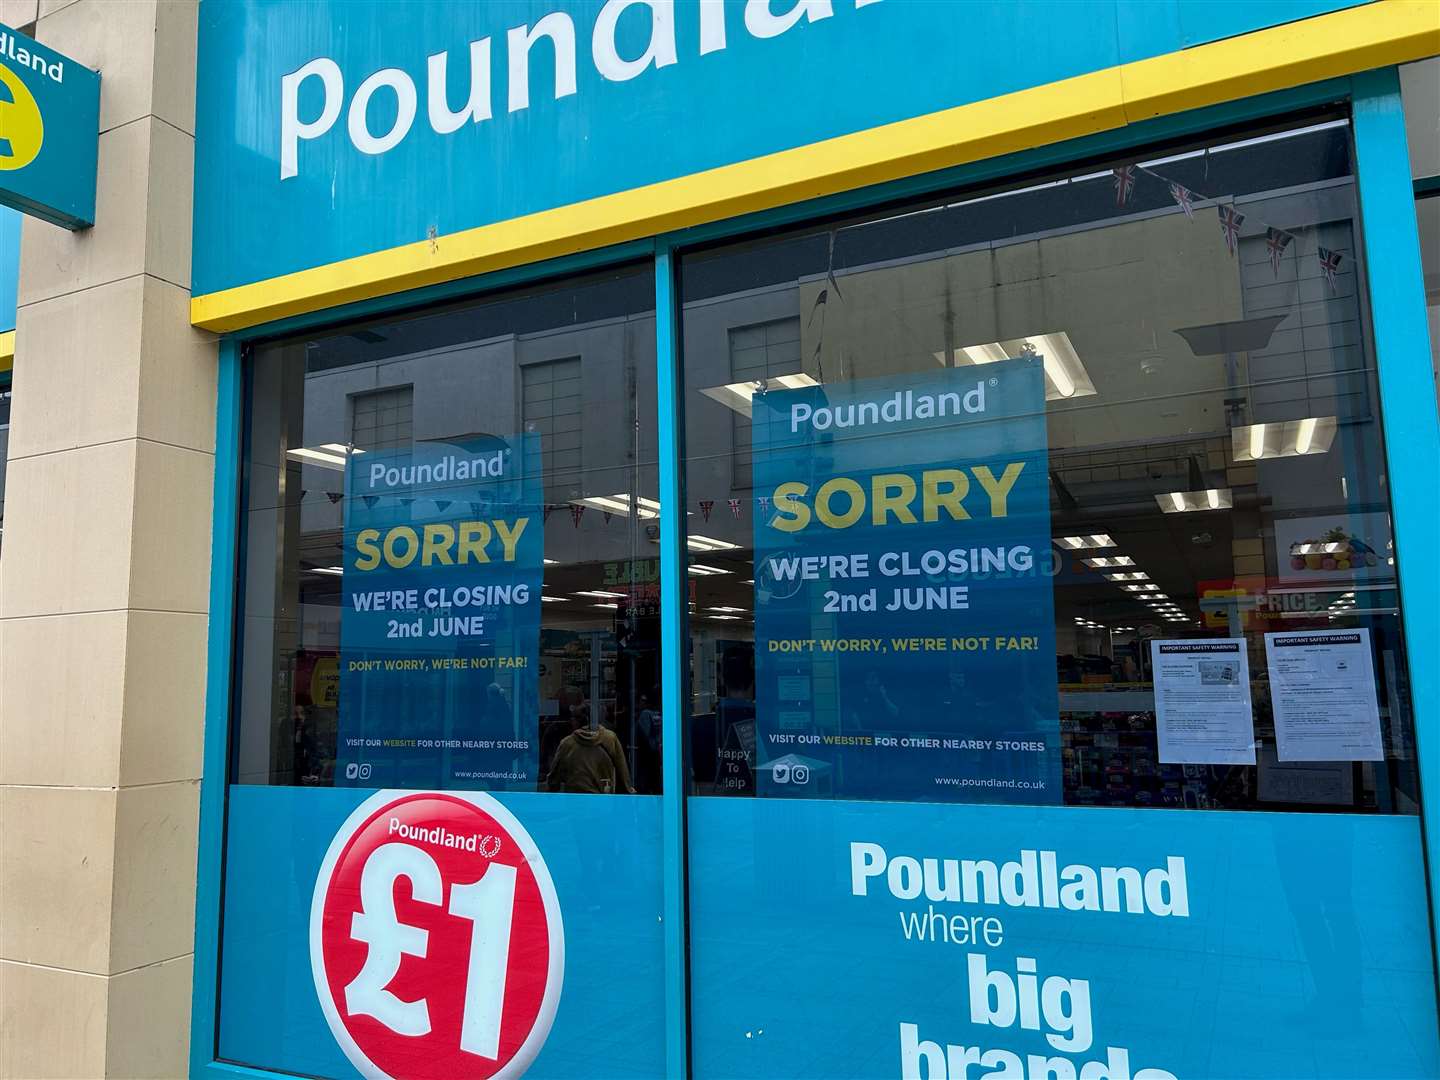 Today is the last chance for customers to shop at the Vancouver Quarter Poundland